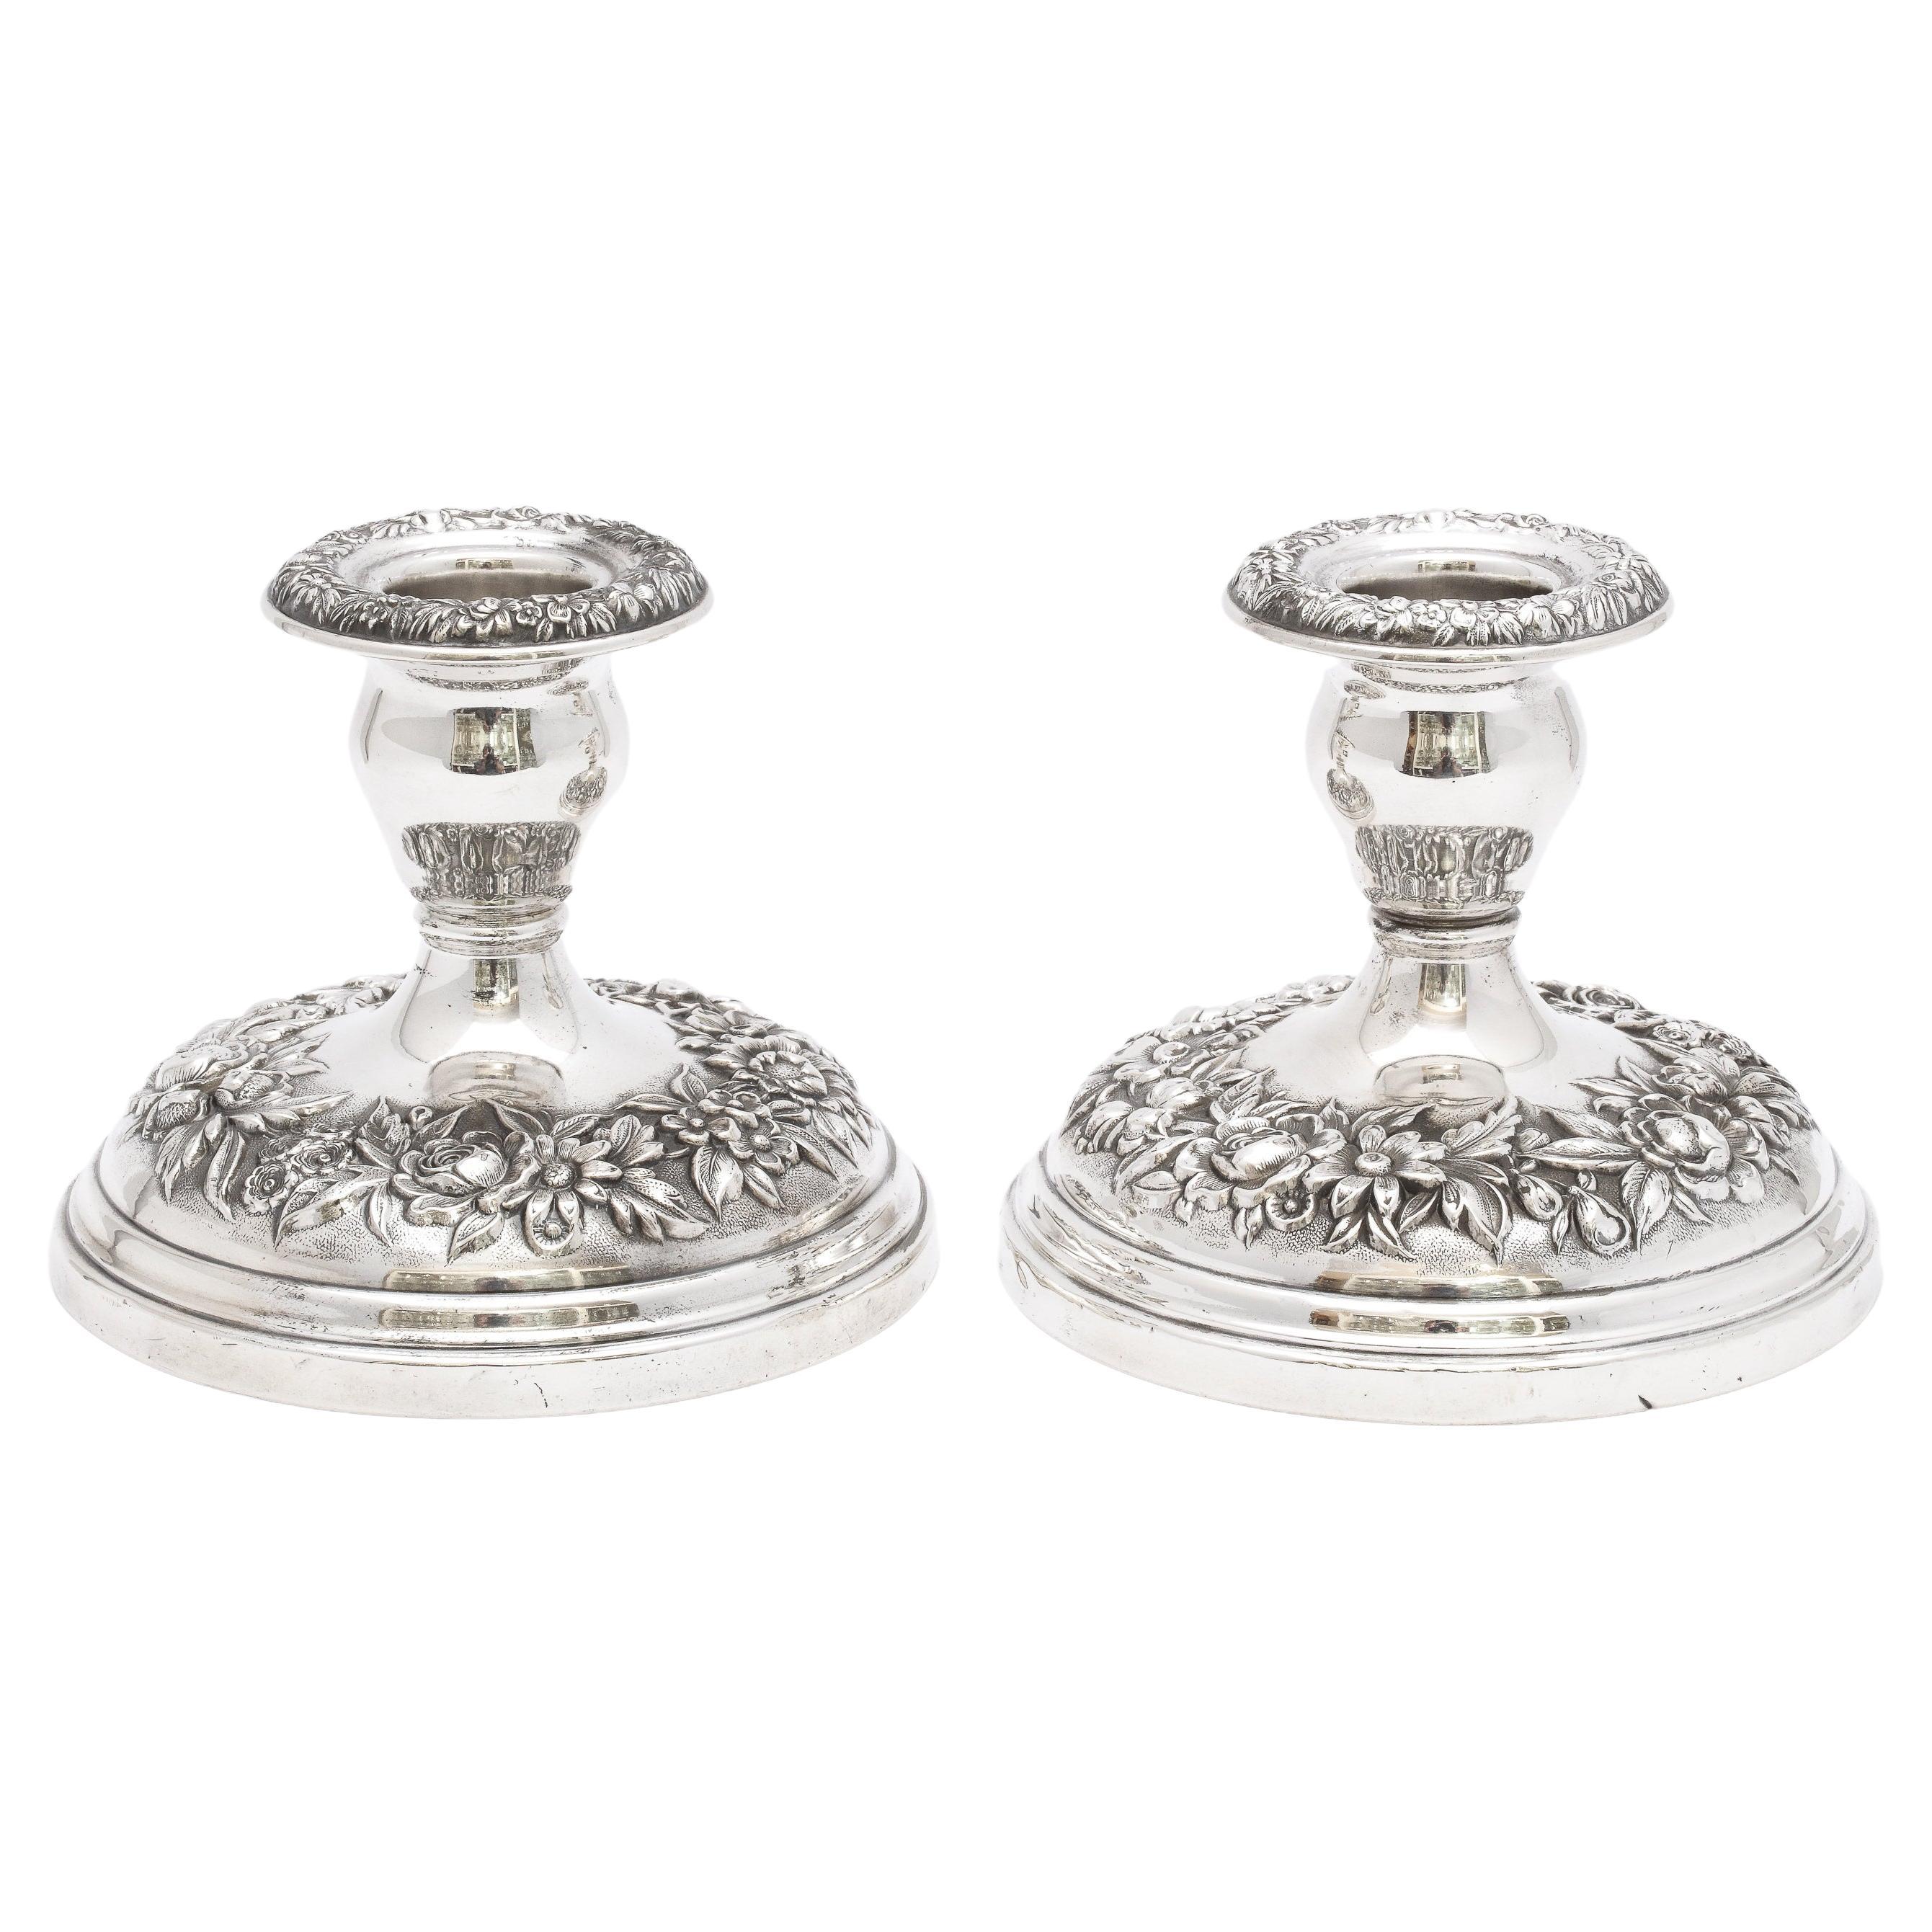 Pair of Sterling Silver Repousse Pattern Candlesticks by S. Kirk and Sons